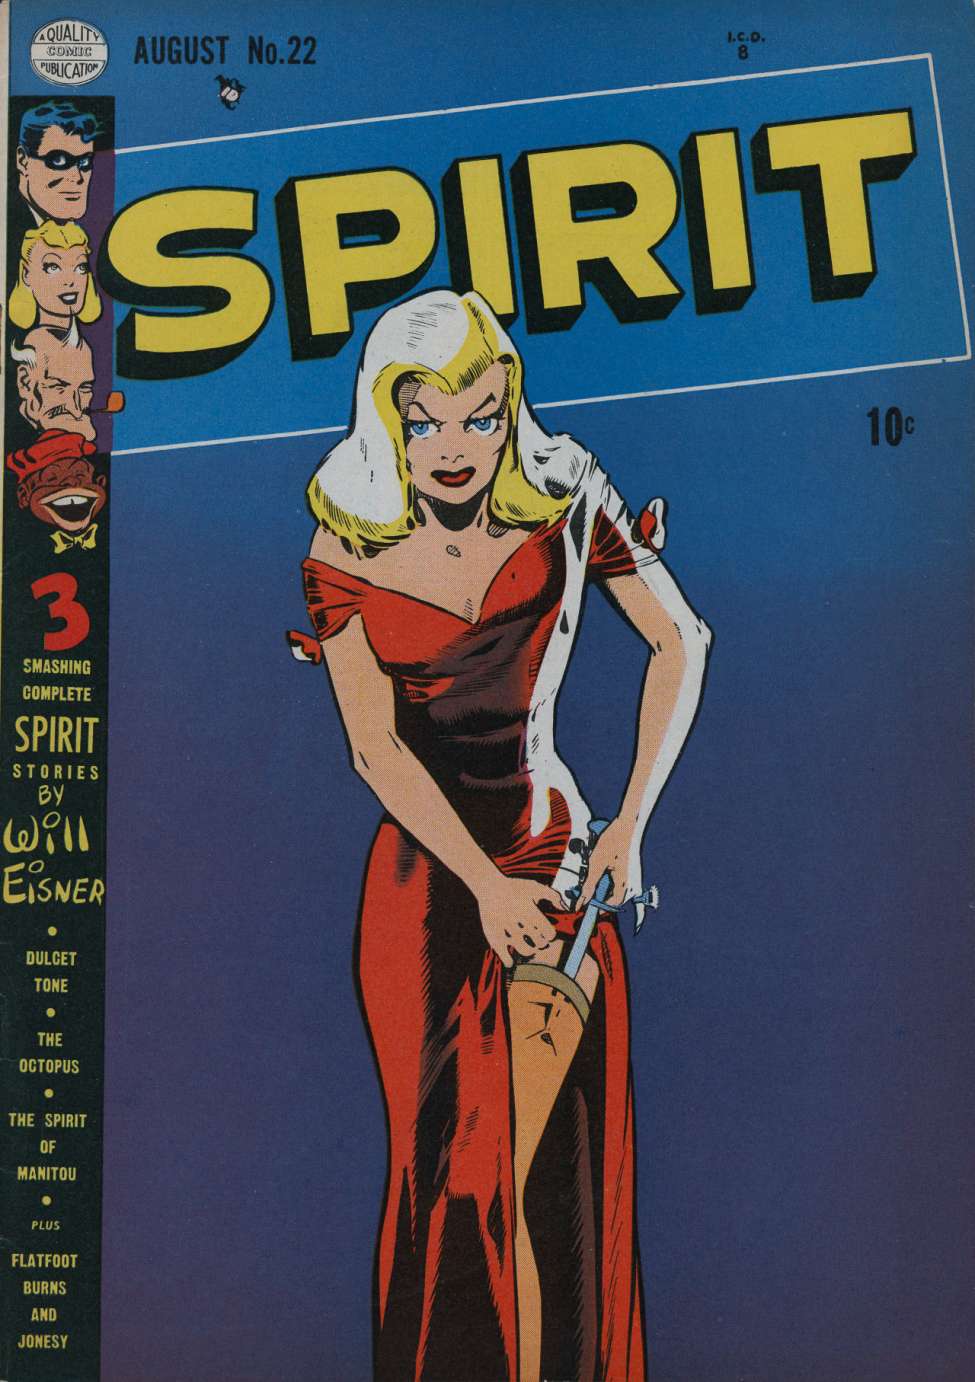 Book Cover For The Spirit 22